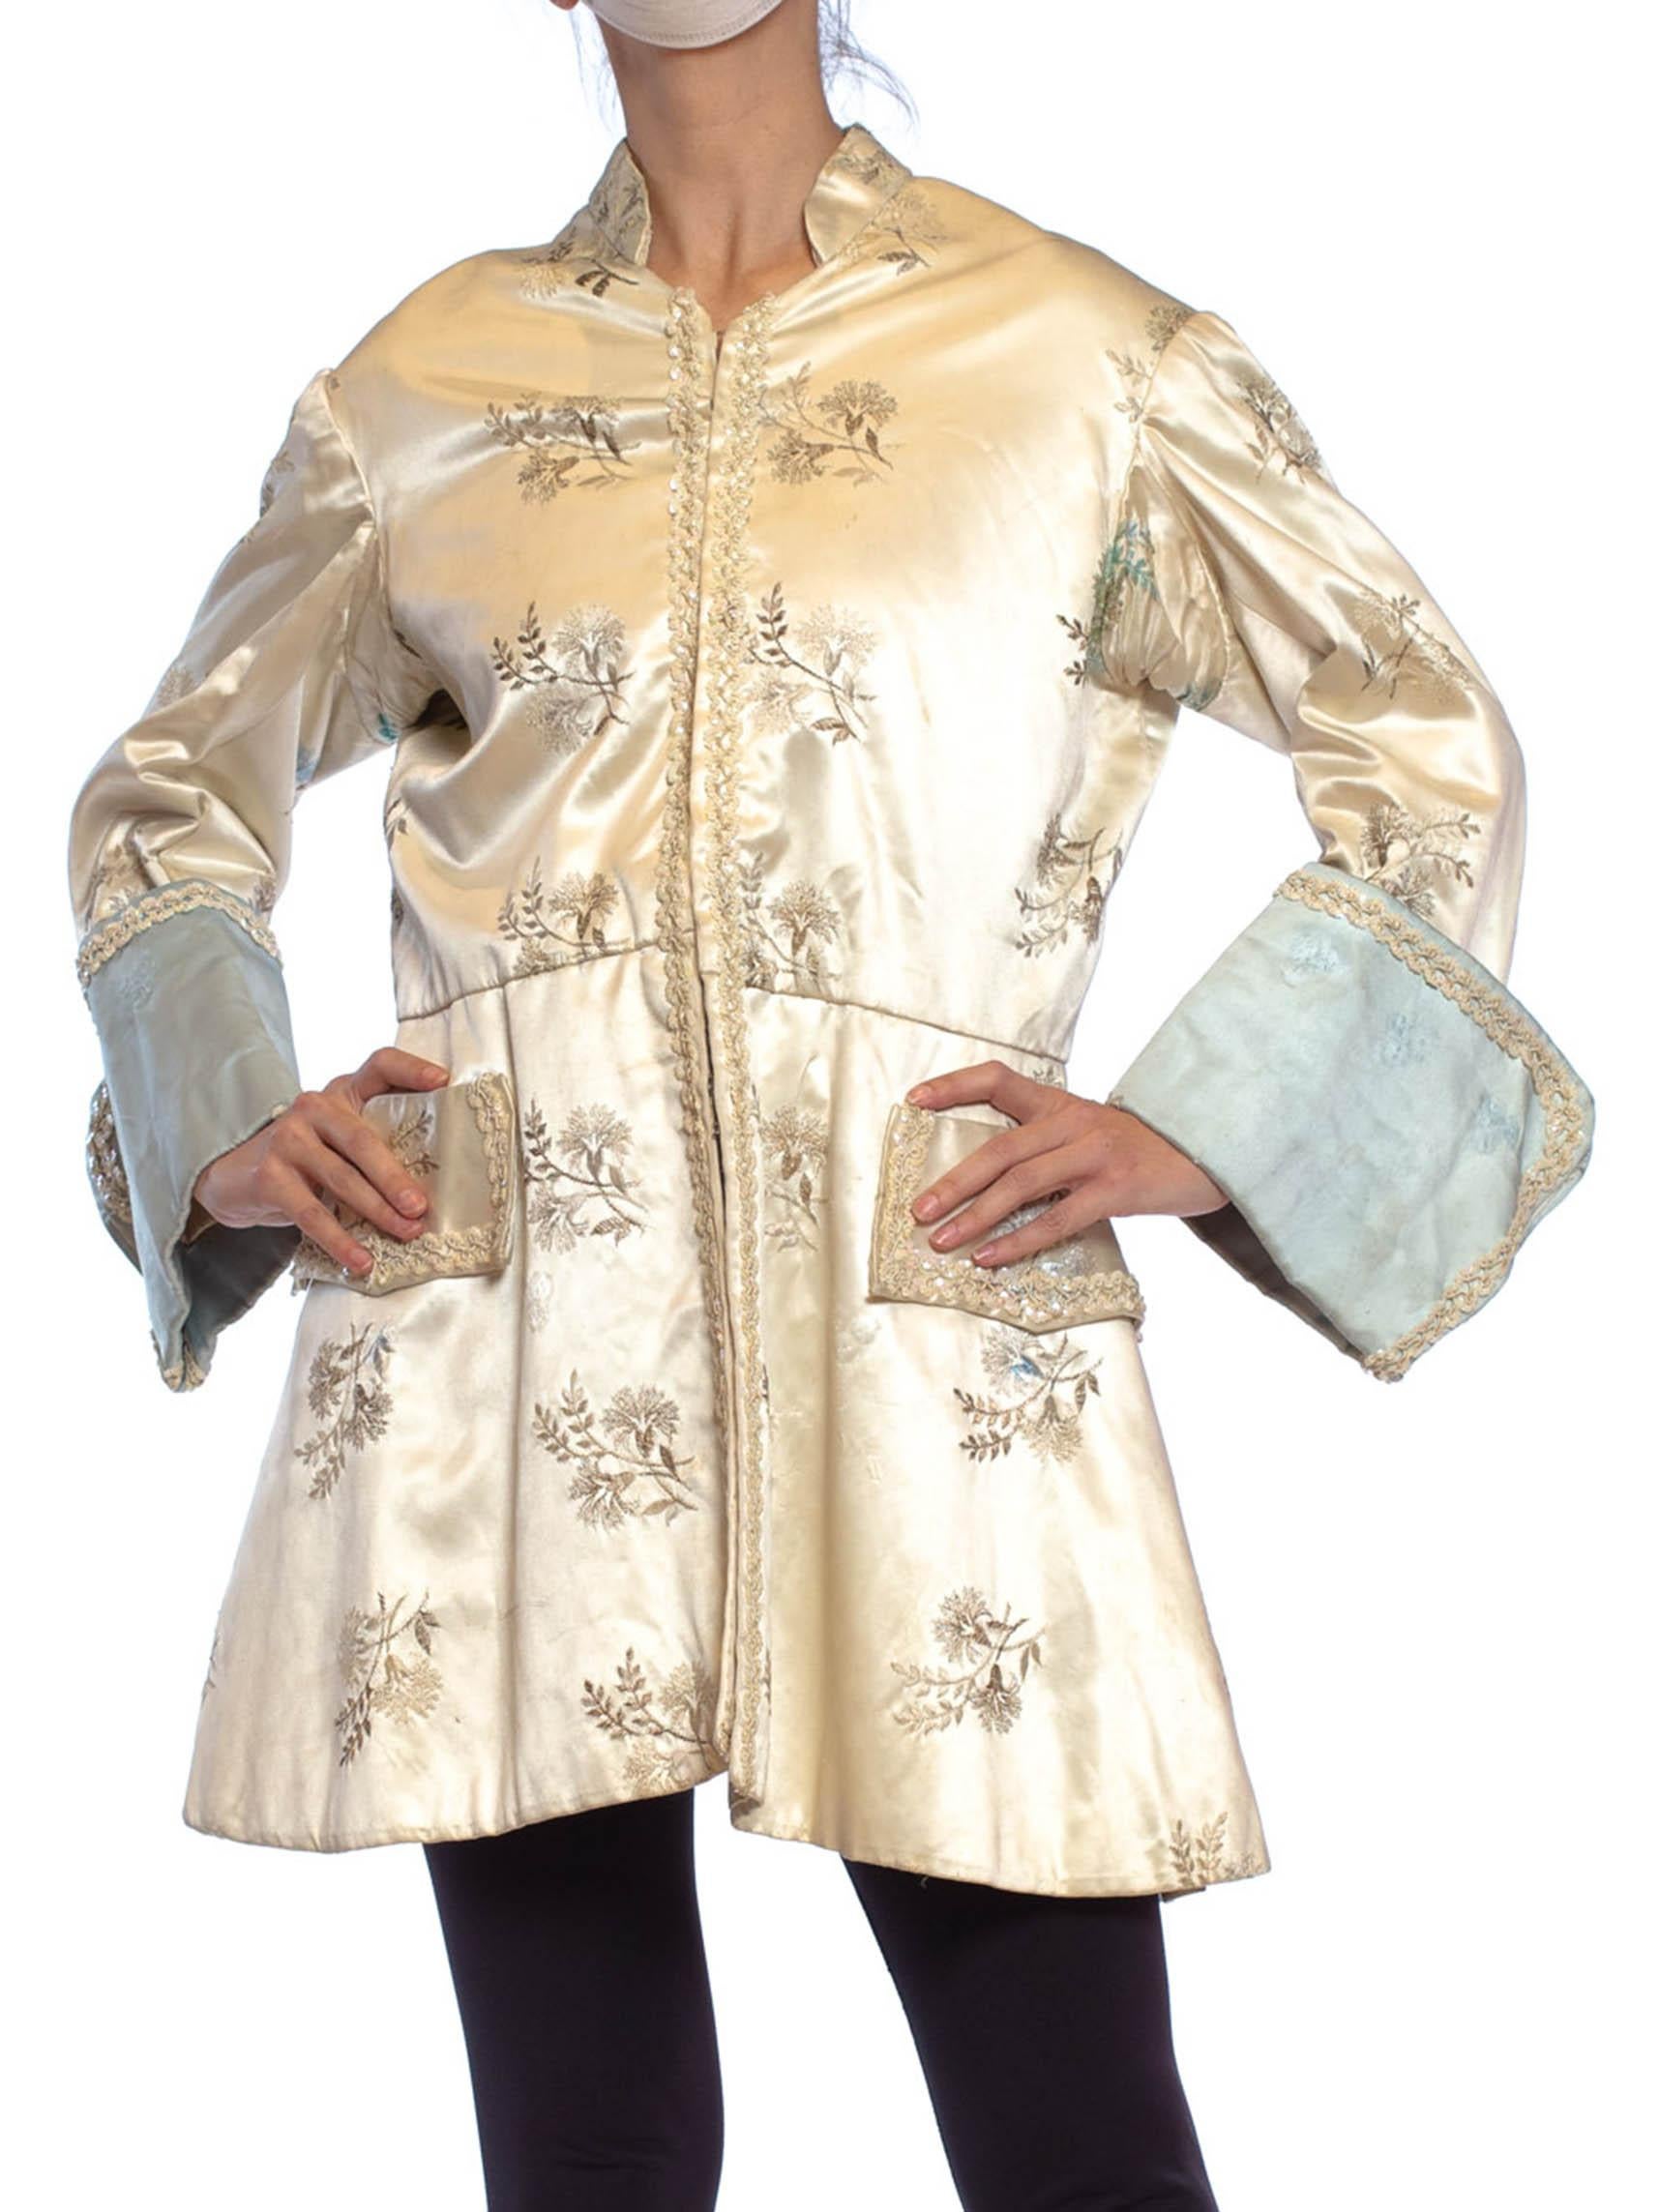 1940S White Rayon Satin Men's Floral Embroidered Frock Coat Jacket From France For Sale 3